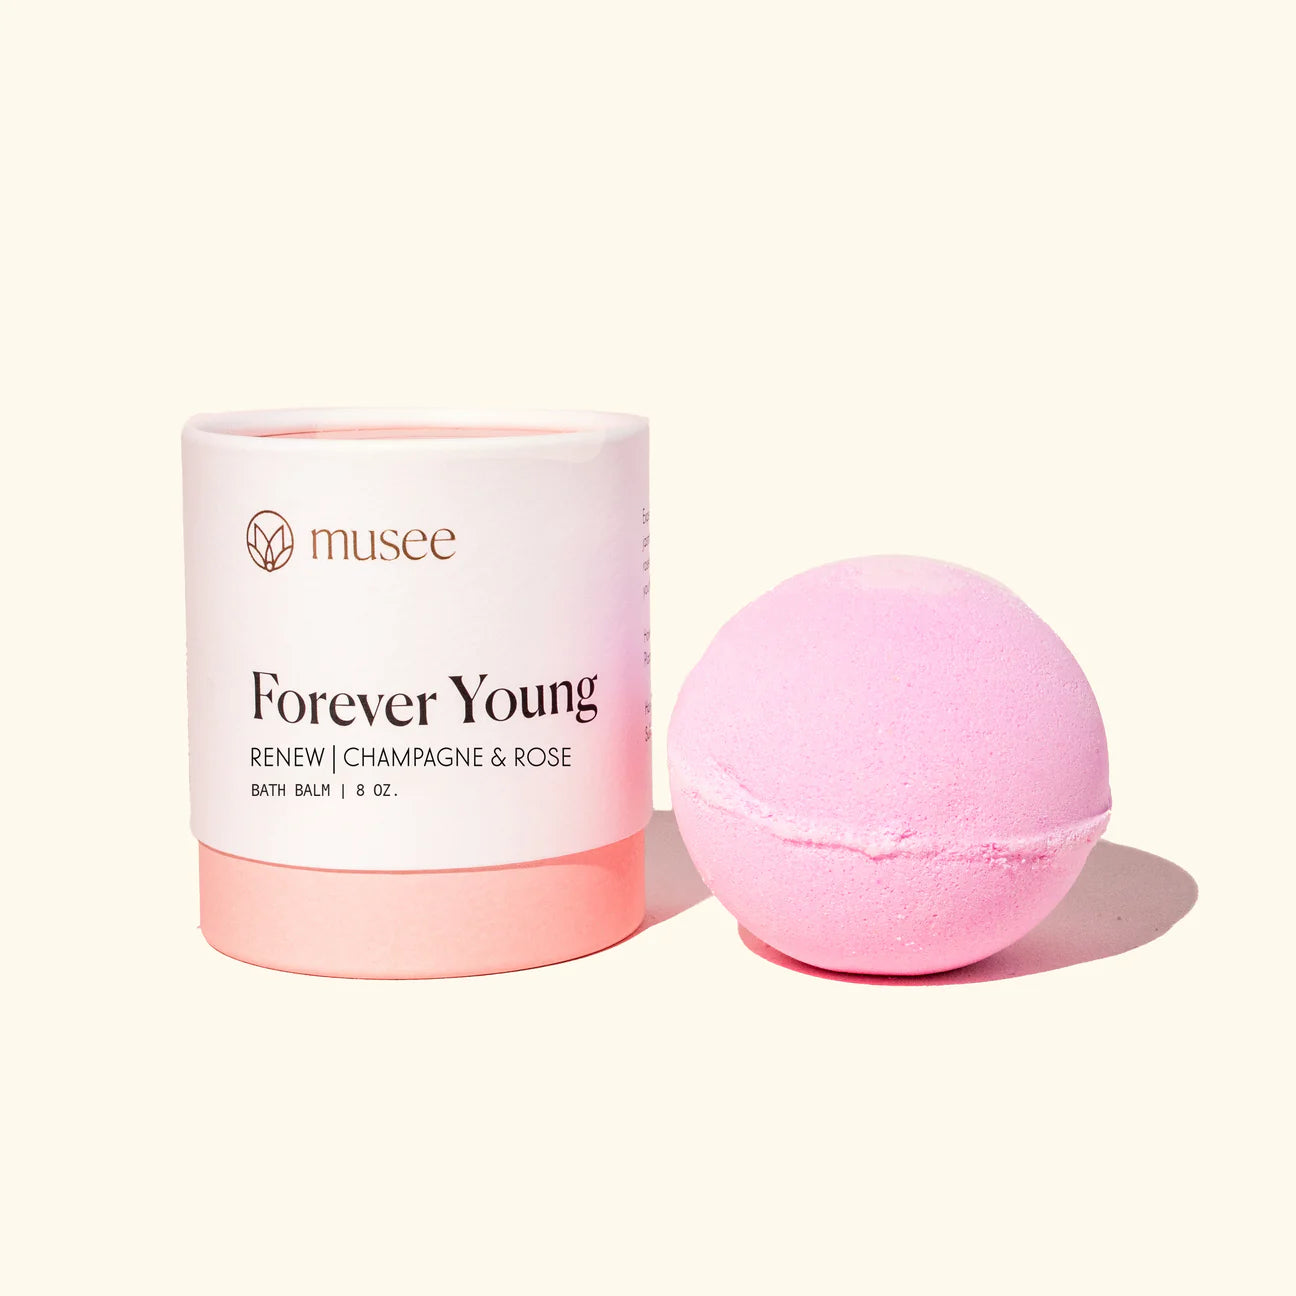 Musee Forever Young Bath Balm Champagne & Rose